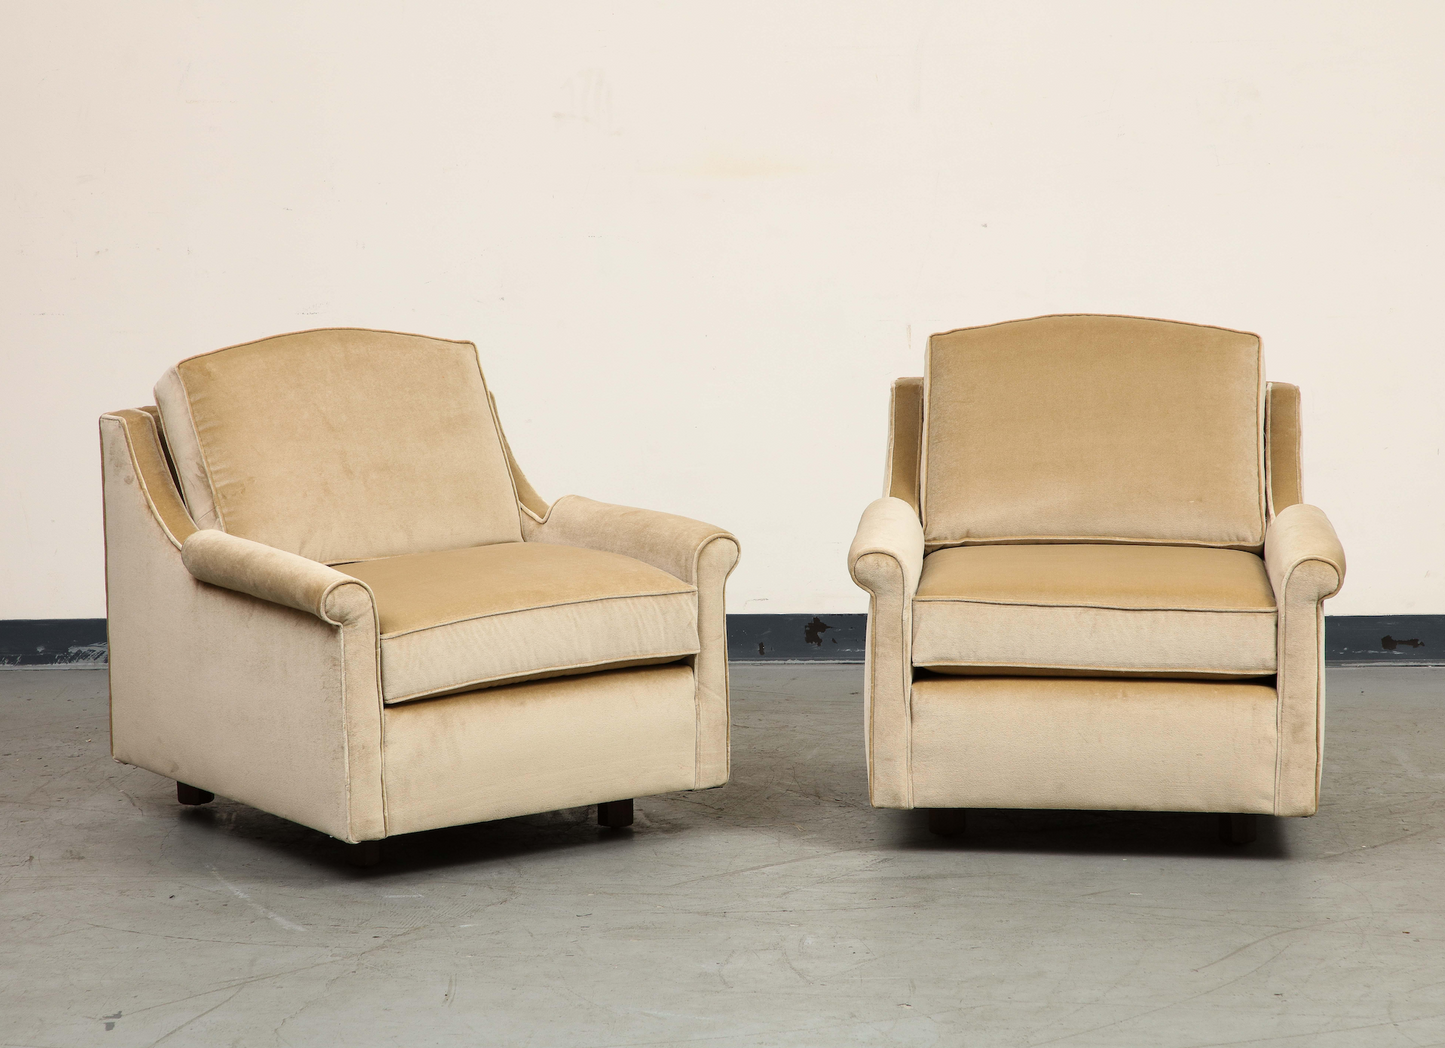 Pair of 1940s Tan Velvet Club Chairs, Newly Upholstered